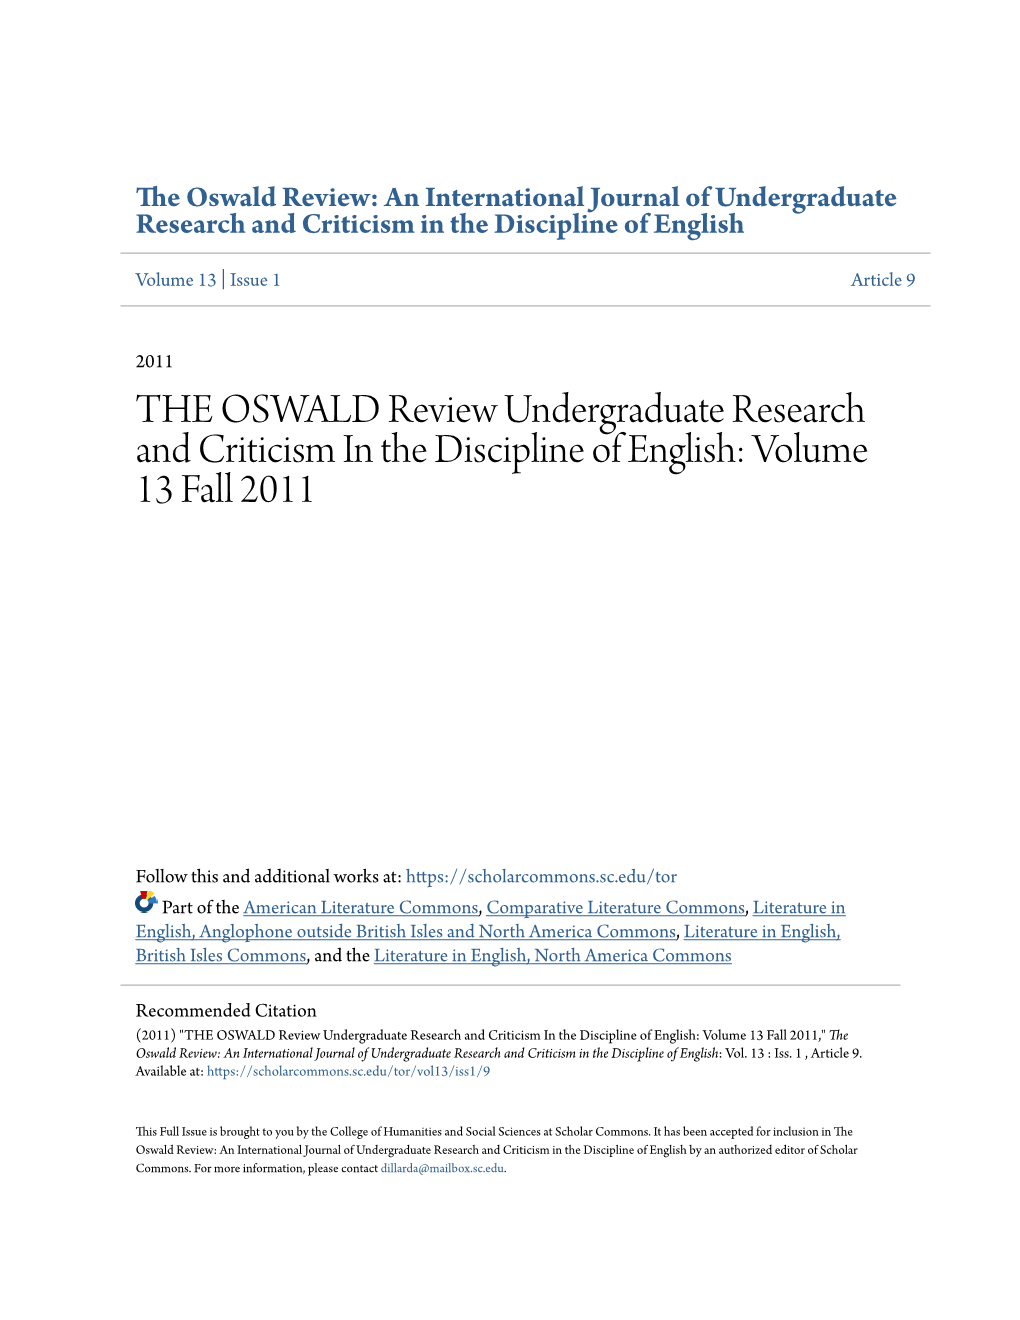 THE OSWALD Review Undergraduate Research and Criticism in the Discipline of English: Volume 13 Fall 2011